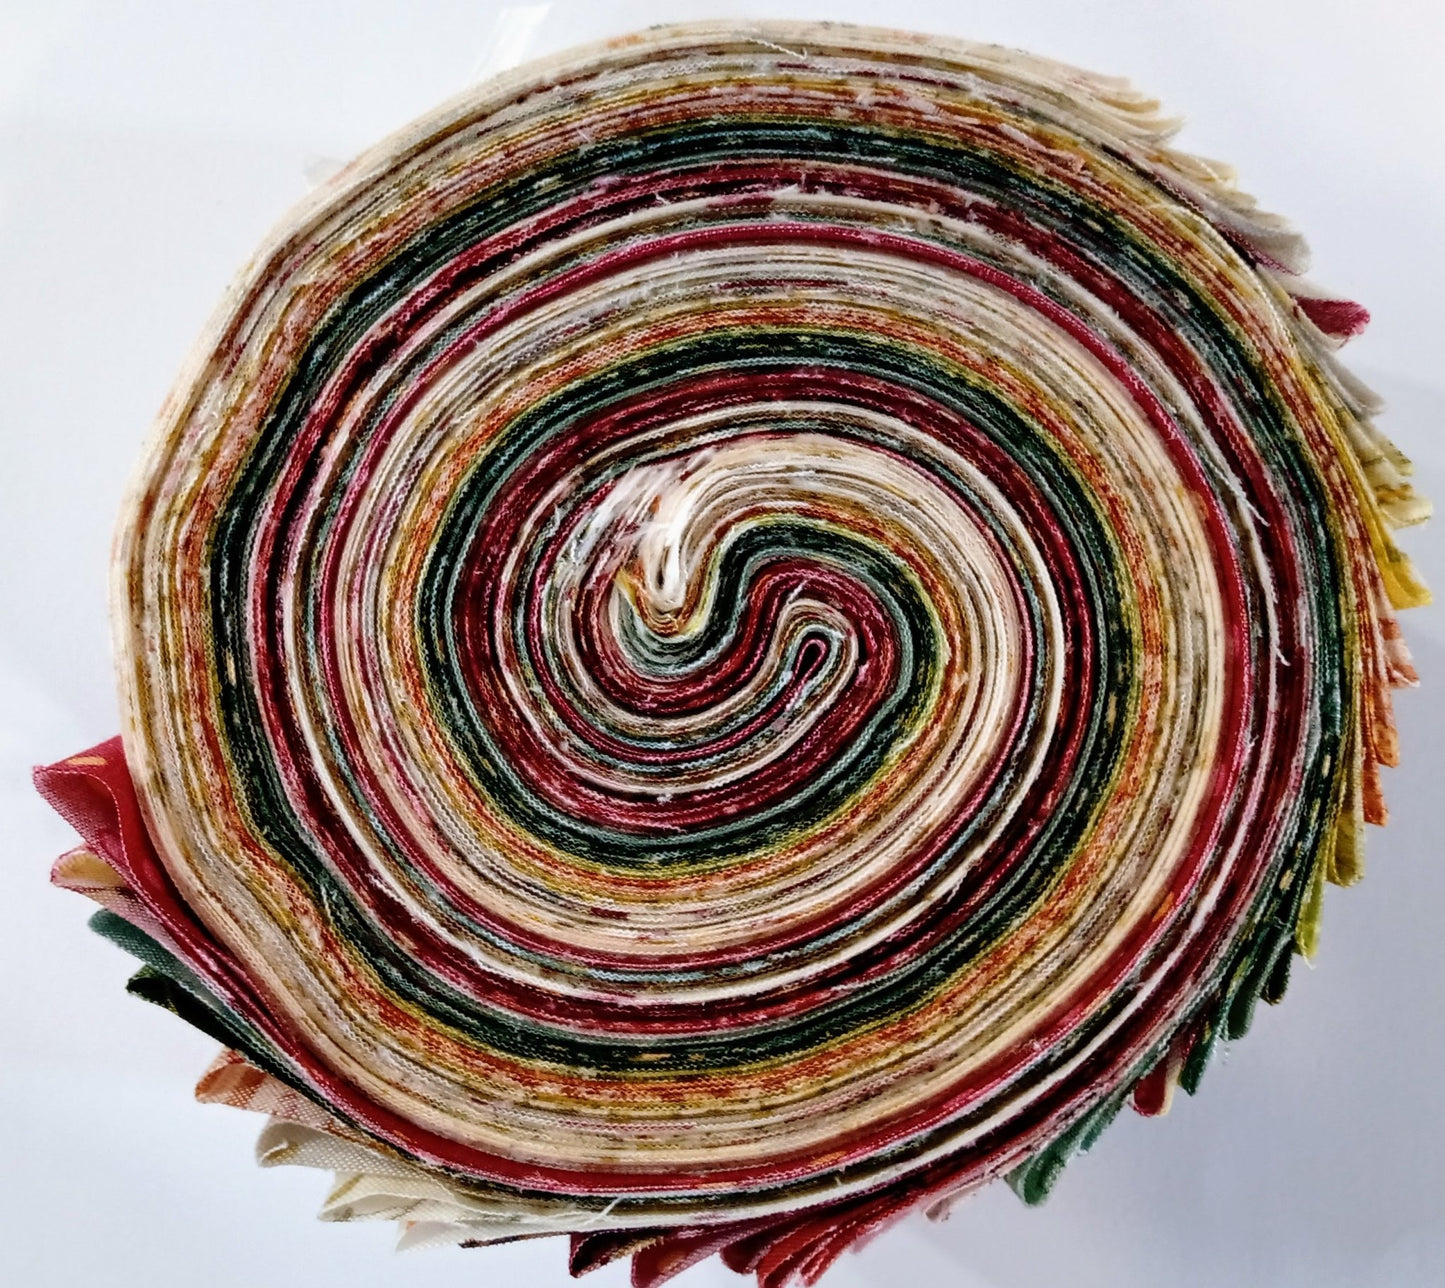 Lady Tulip - Jelly Roll (40 bandes) - Licence To Quilt